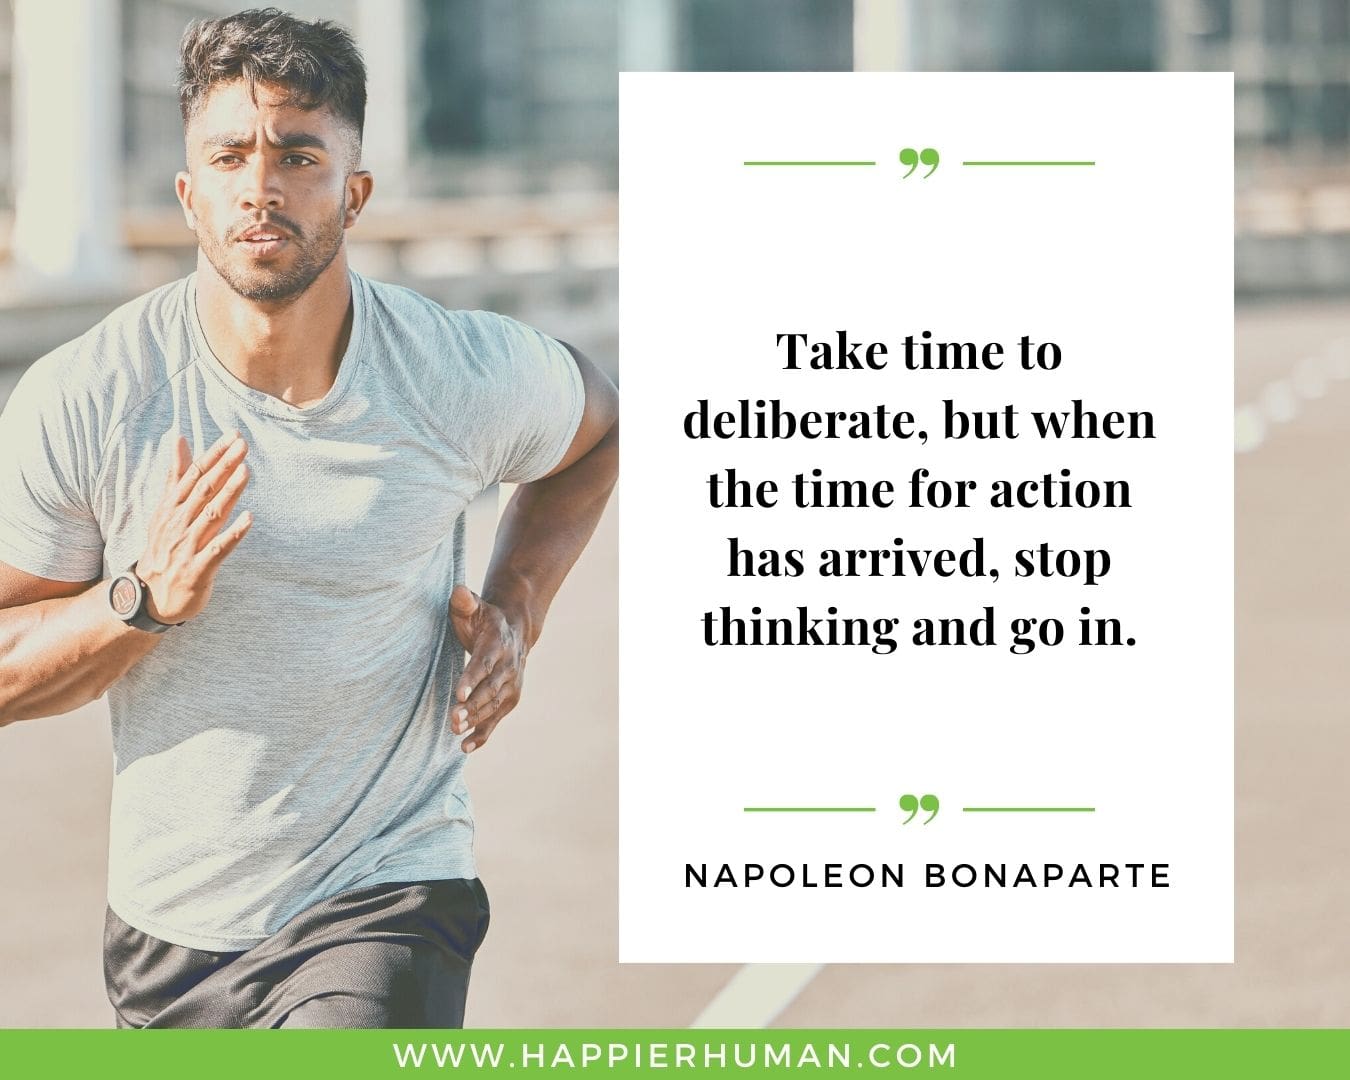 Overthinking Quotes - “Take time to deliberate, but when the time for action has arrived, stop thinking and go in.” - Napoleon Bonaparte